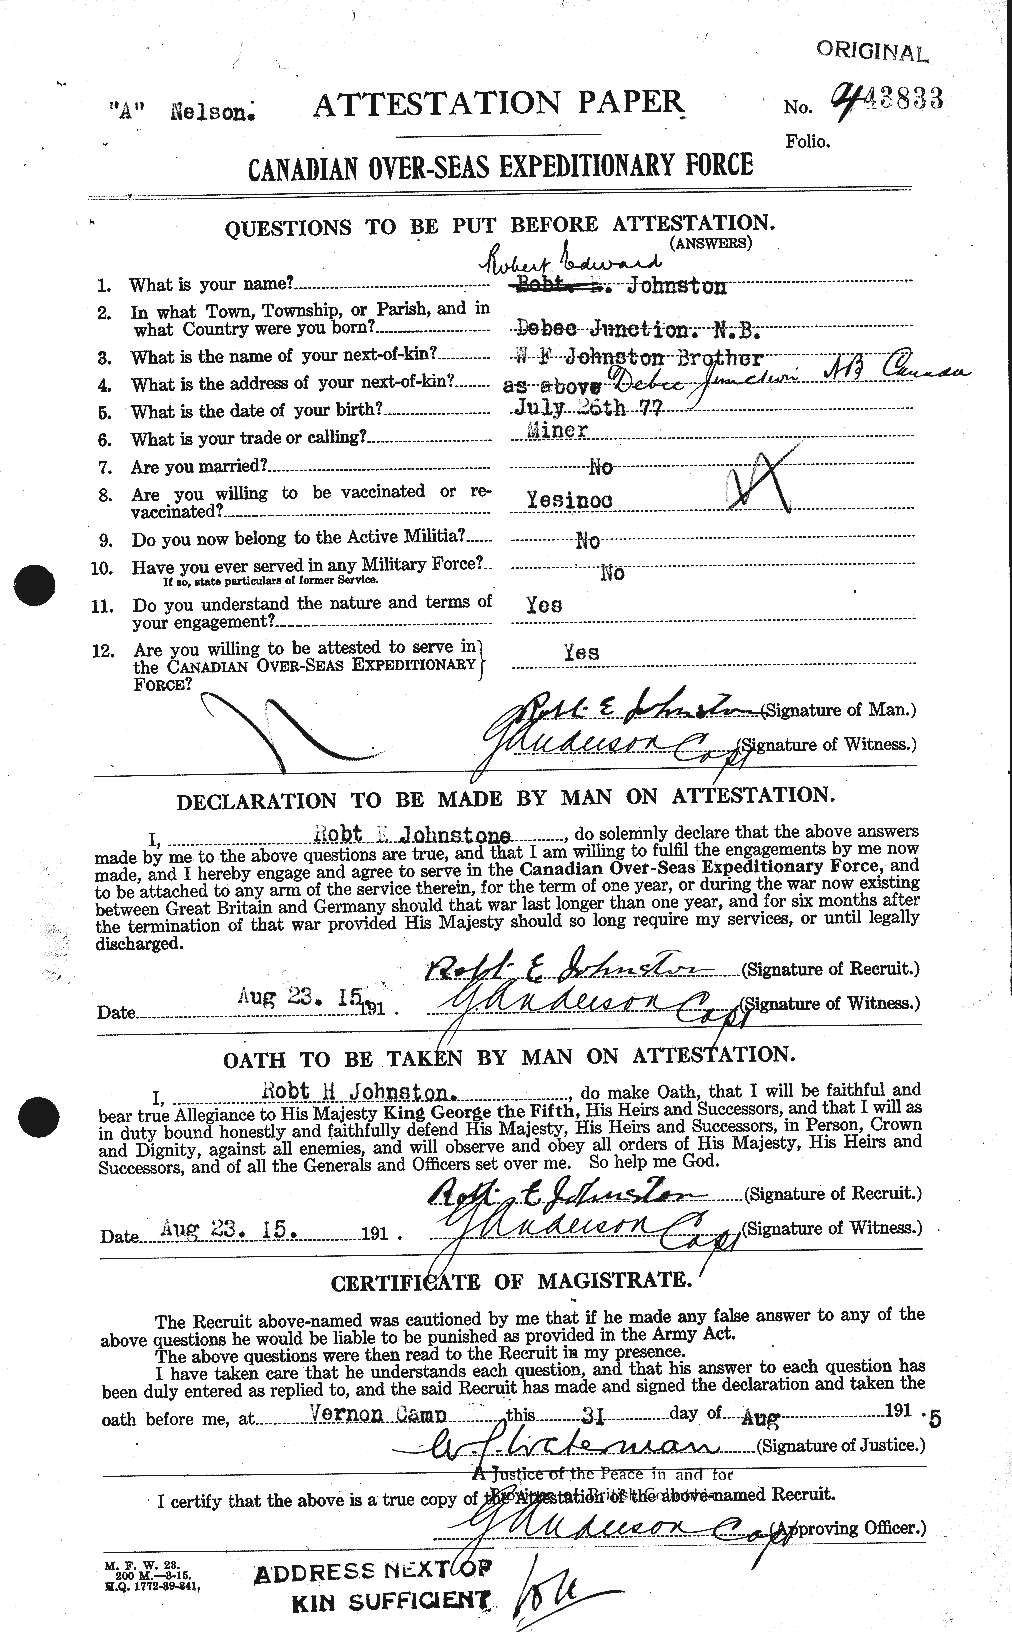 Personnel Records of the First World War - CEF 427013a